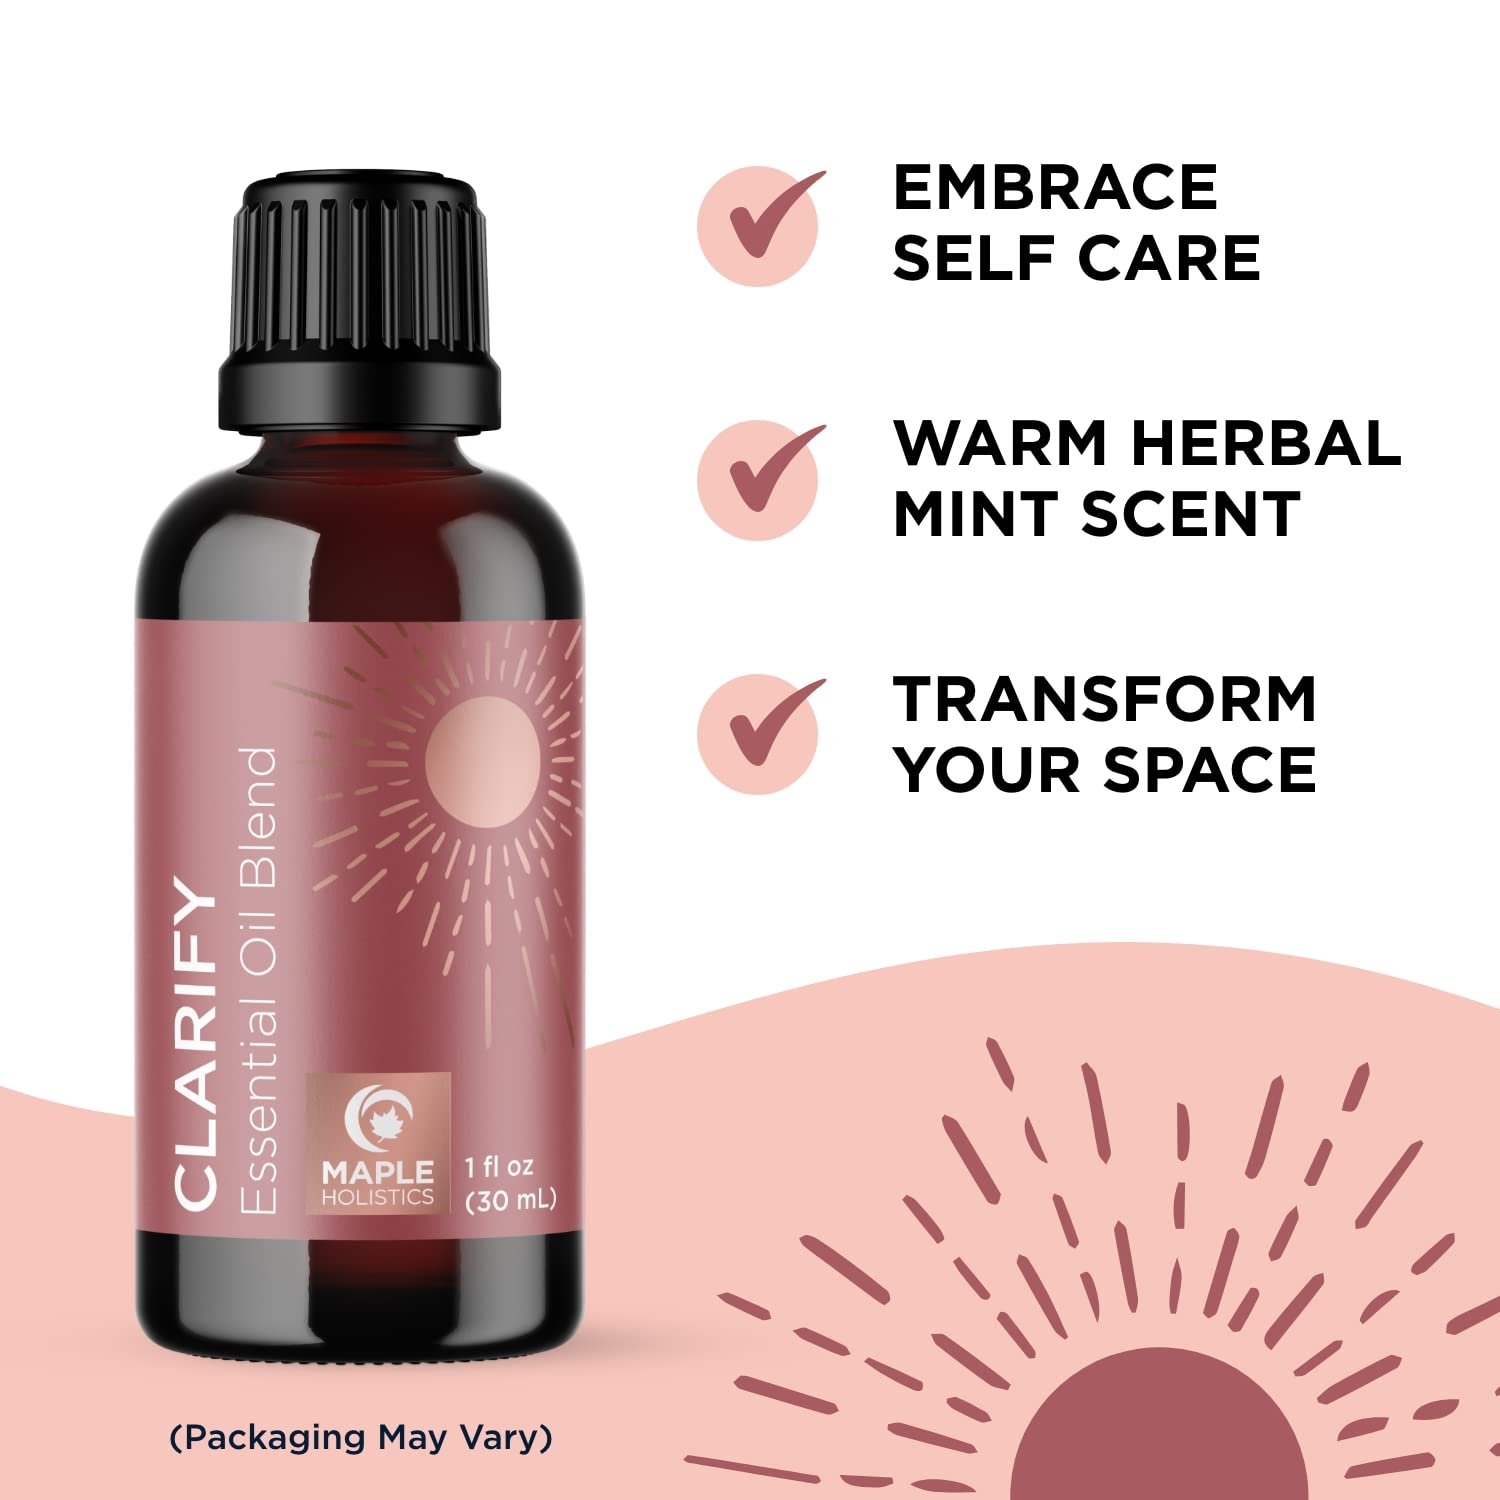 Maple Holistics Essential Oil Set - Breathe Focus Clarify and Energize Purifying Essential Oil Blends for Diffuser Aromatherapy and Baths - Relaxing Essential Oils for Diffusers for Home